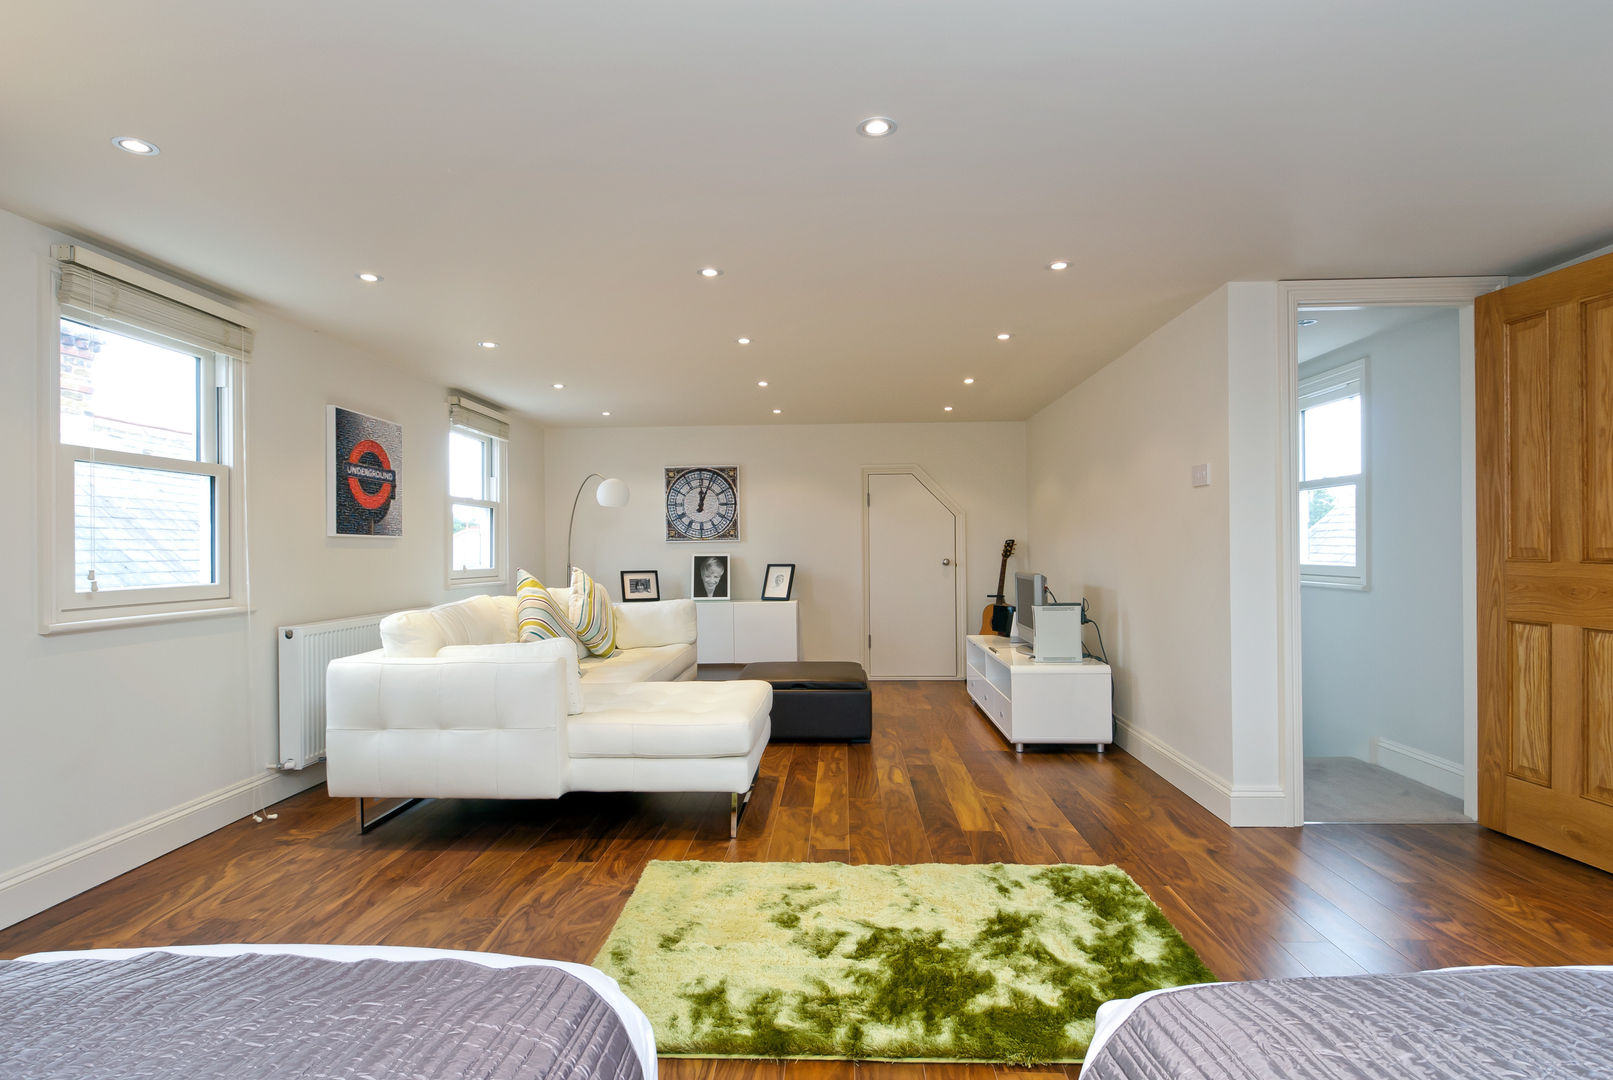 Modern living area transformation A1 Lofts and Extensions Chambre moderne